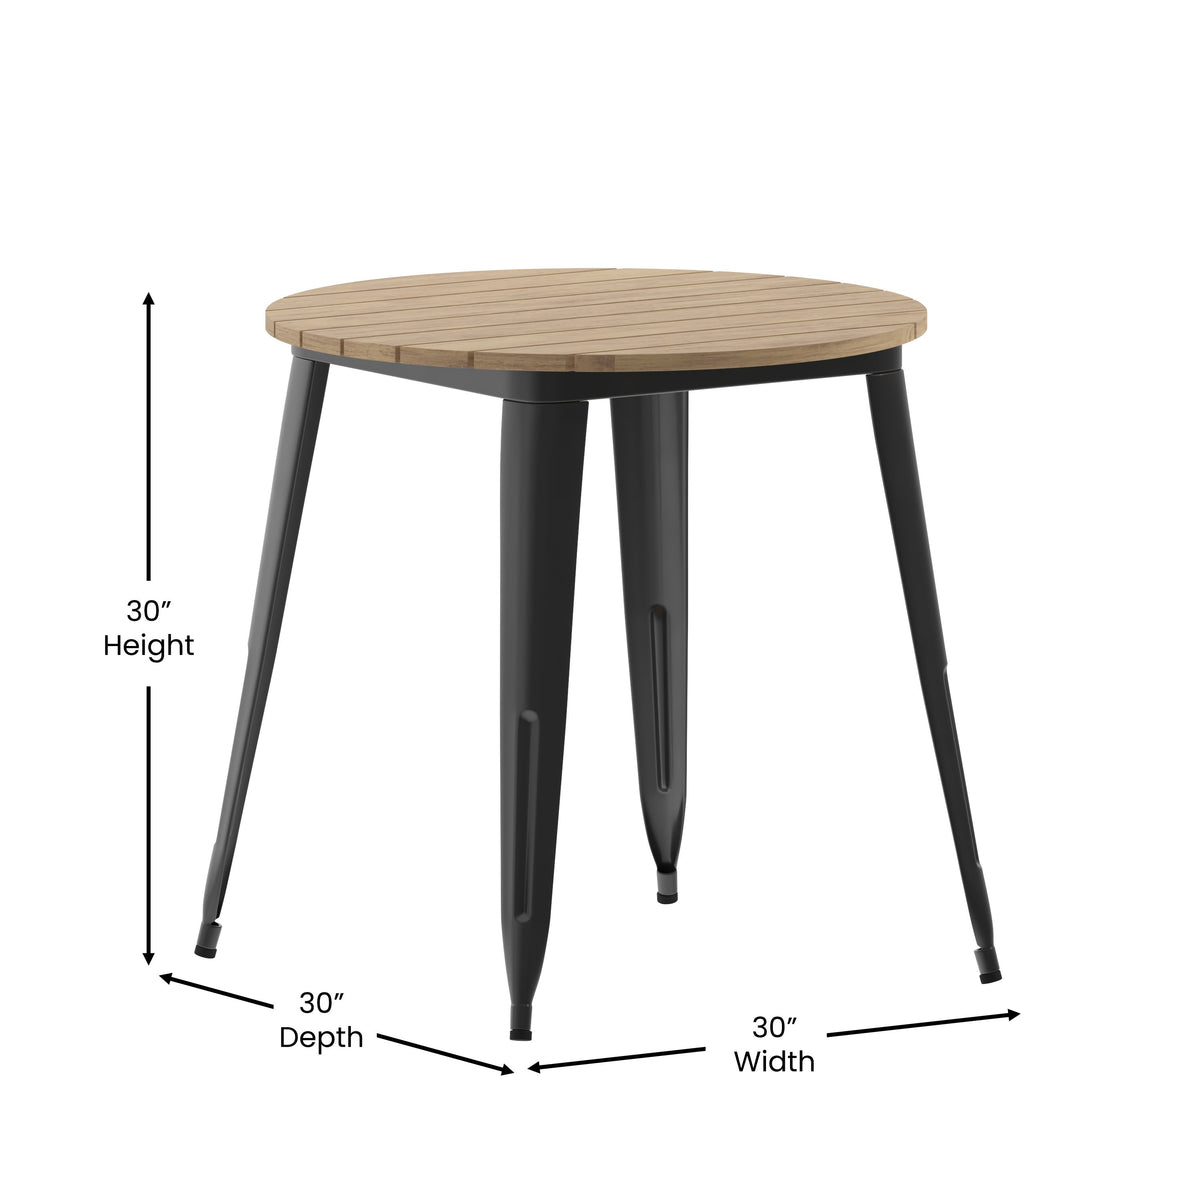 Brown/Black |#| 30inch RD Commercial Poly Resin Restaurant Table with Steel Frame-Brown/Black